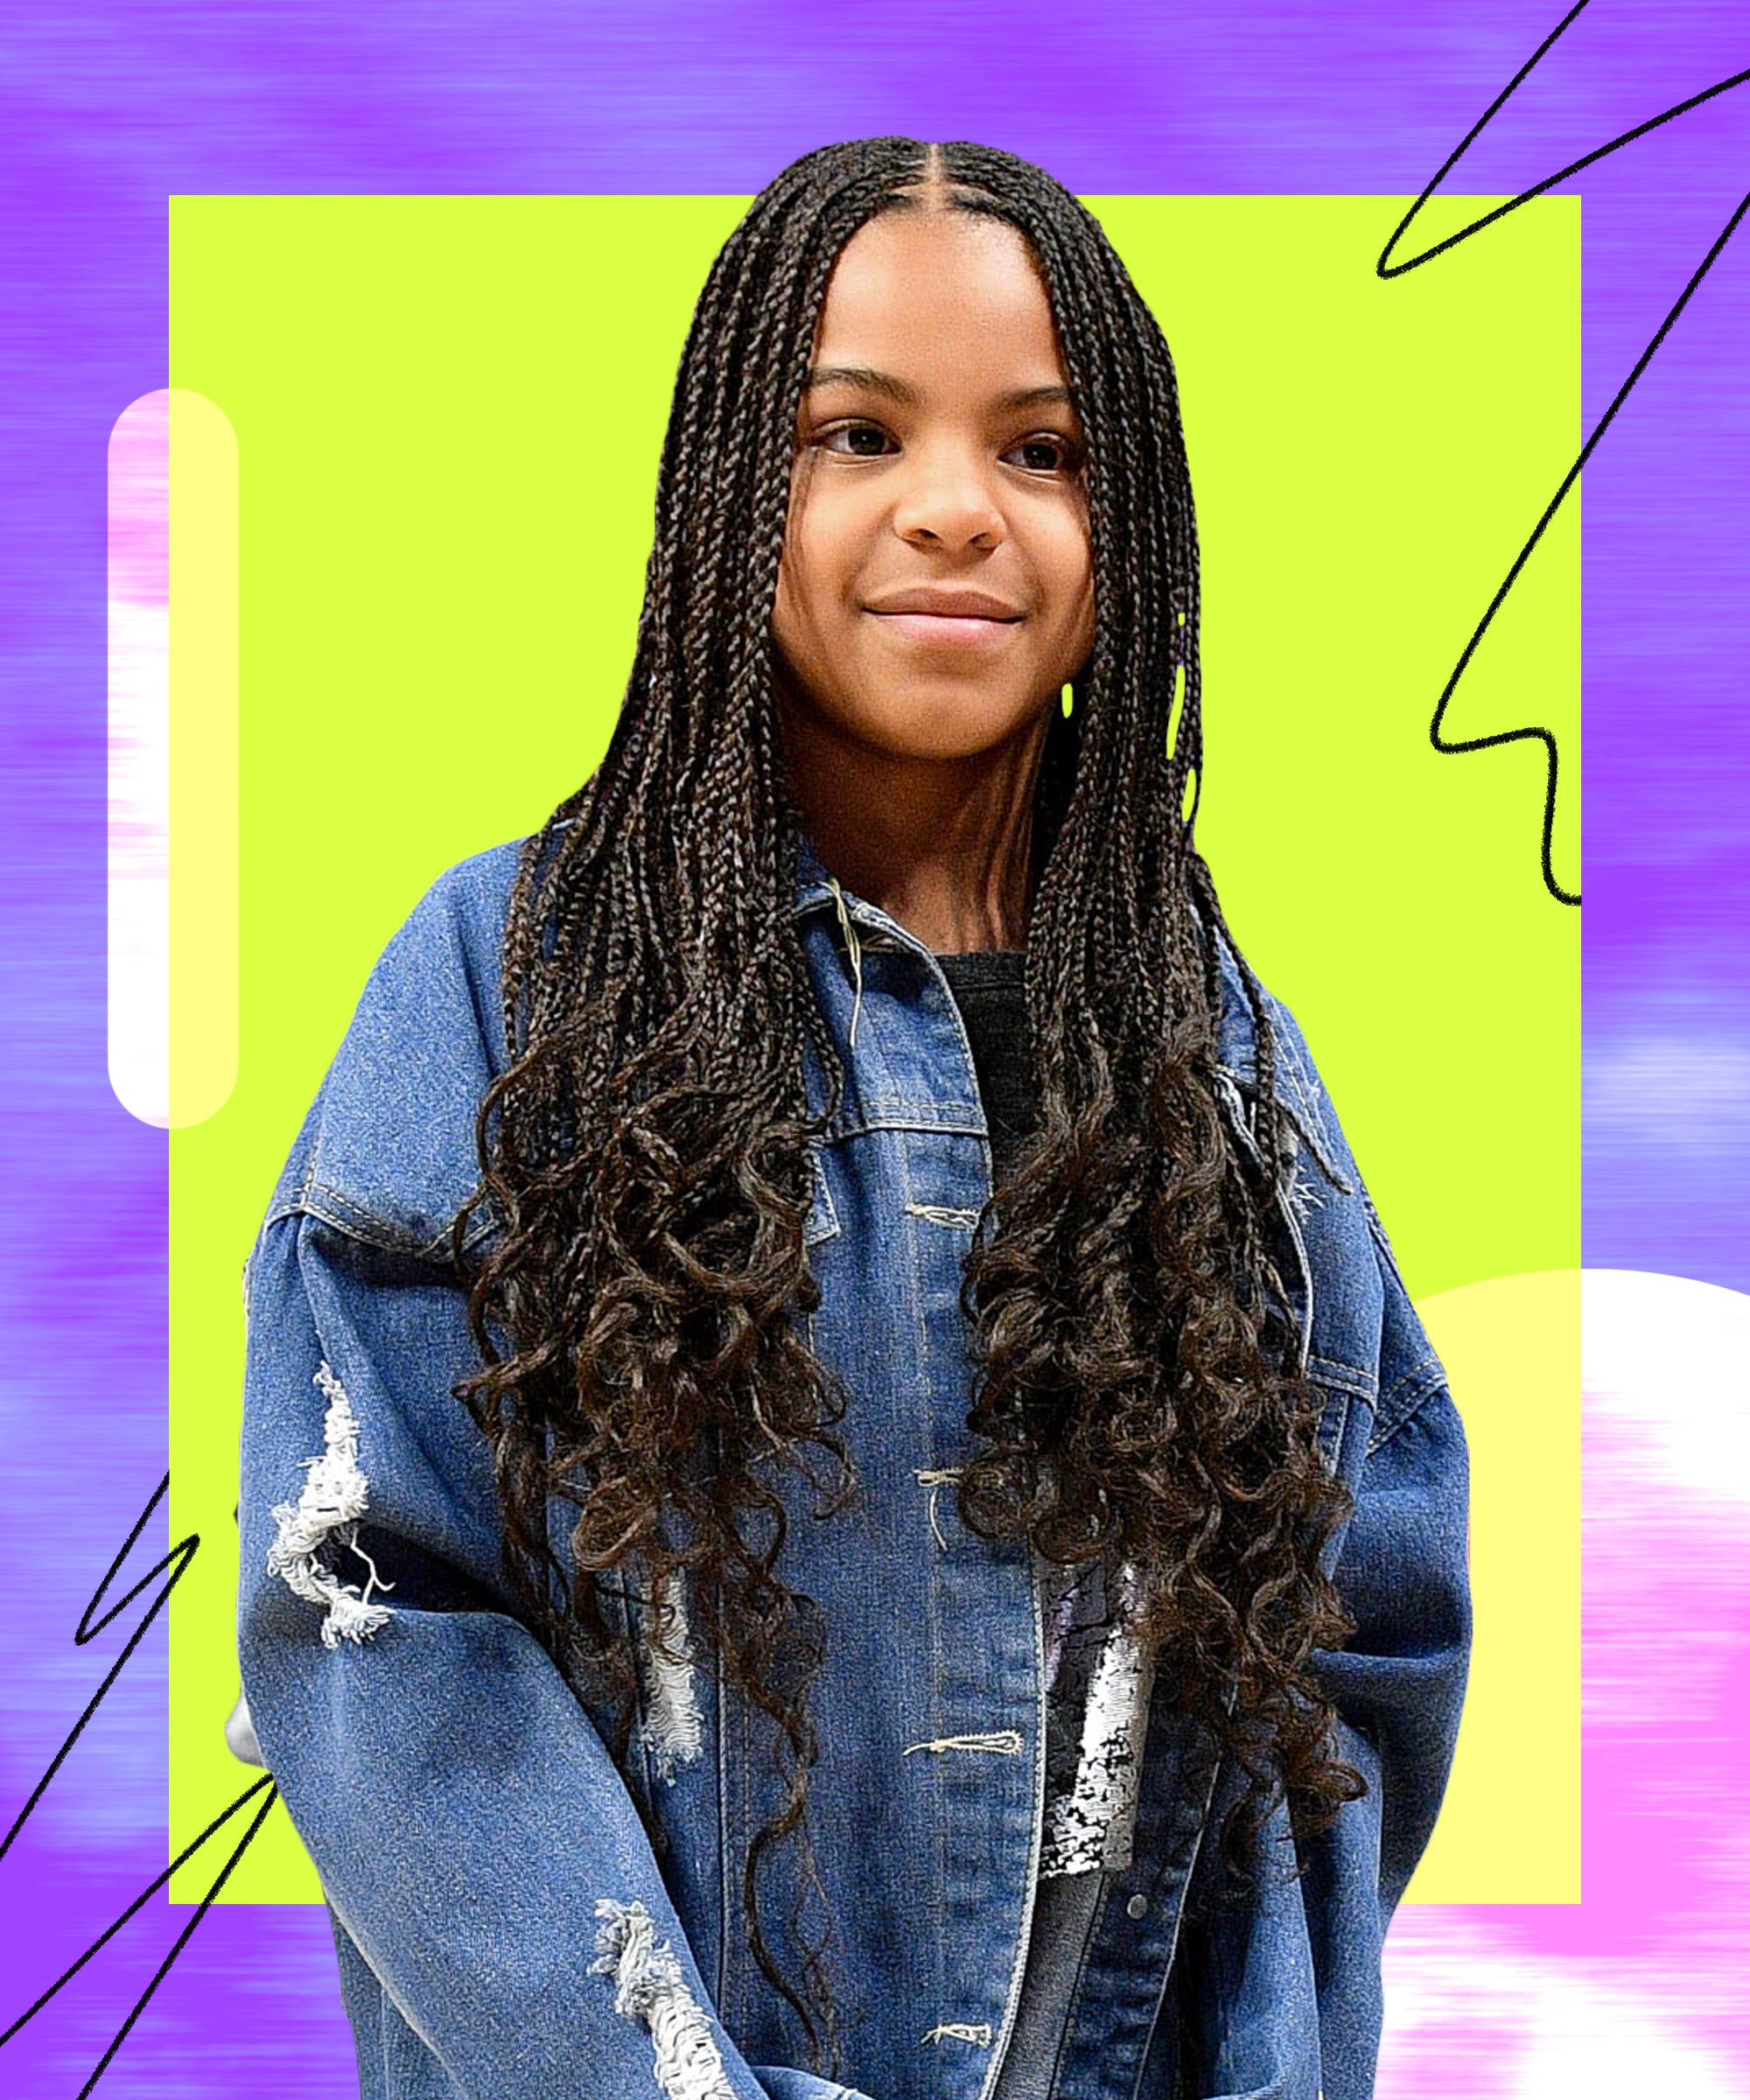 Blue Ivy Becomes Youngest BET Award Winner